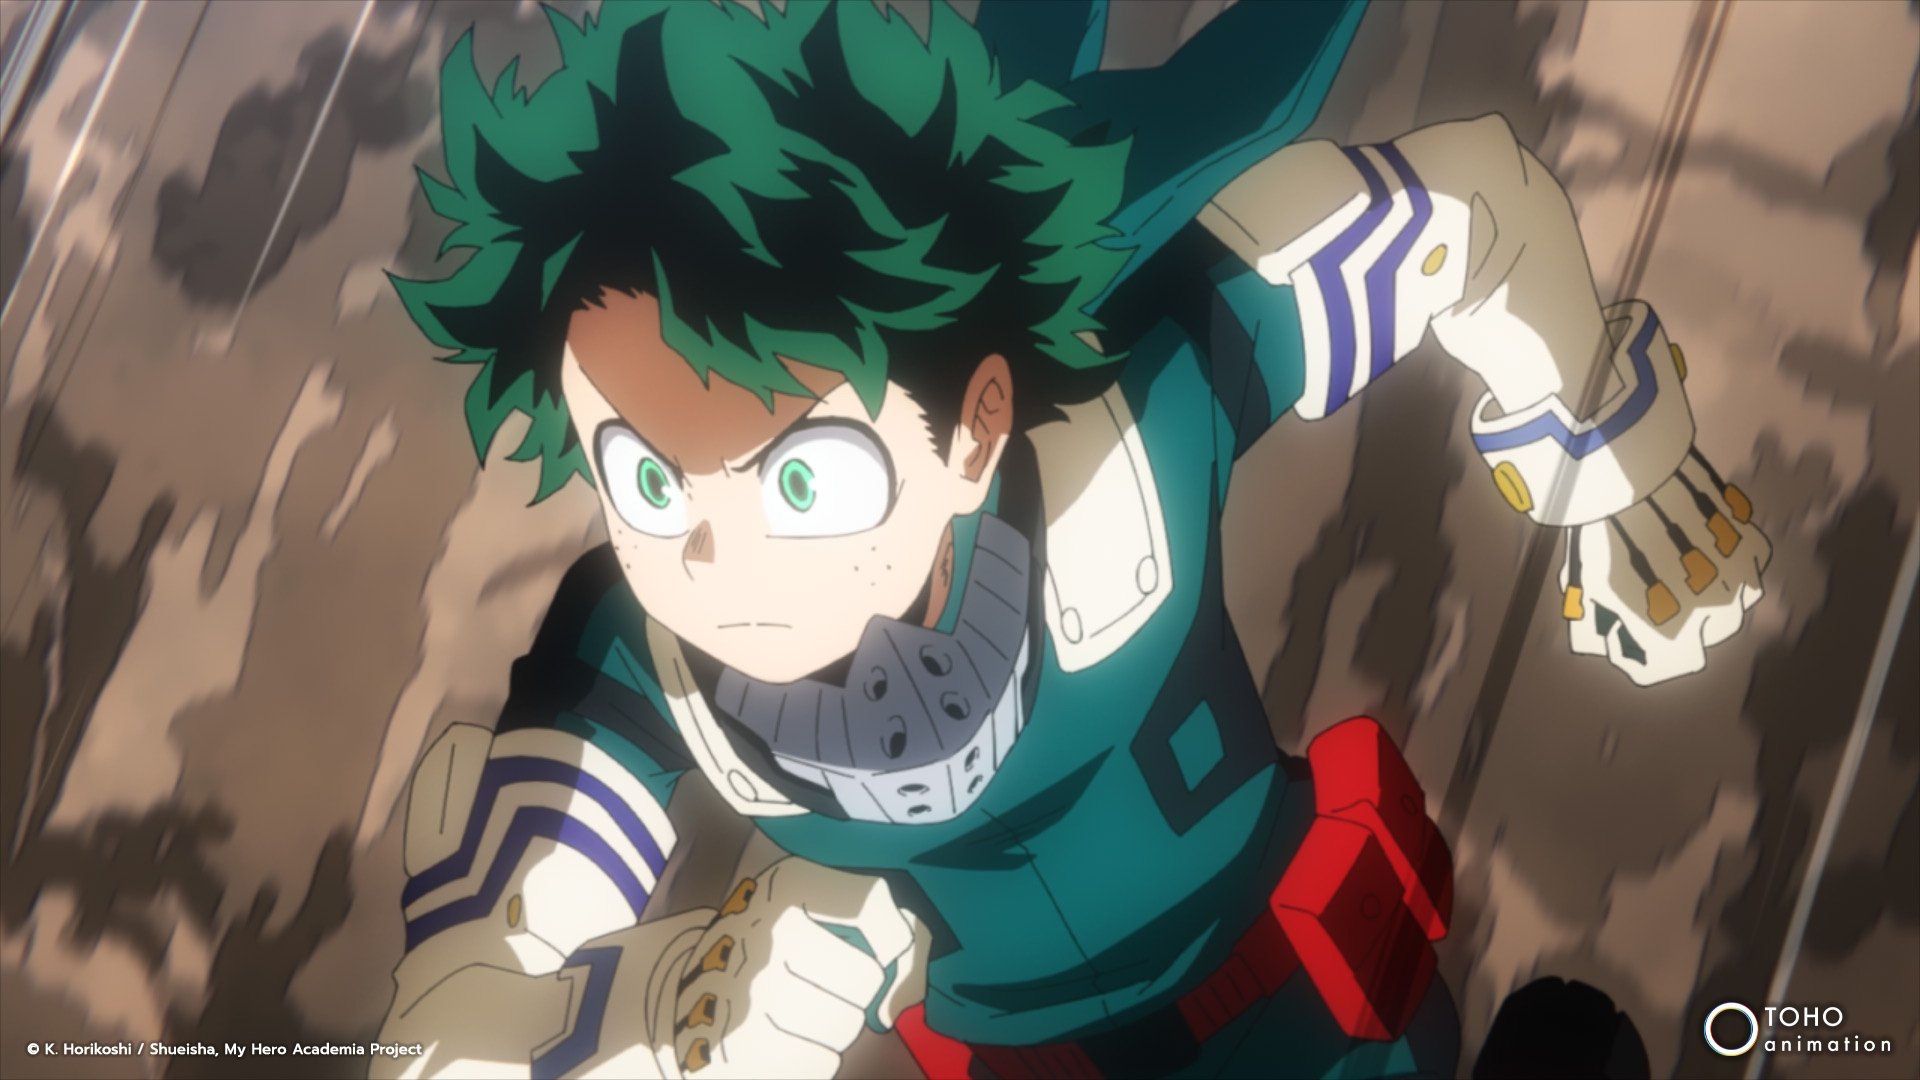 Still of 'My Hero Academia' Season 6 for our best anime of 2022 list. It shows Deku running down a dirt slope.